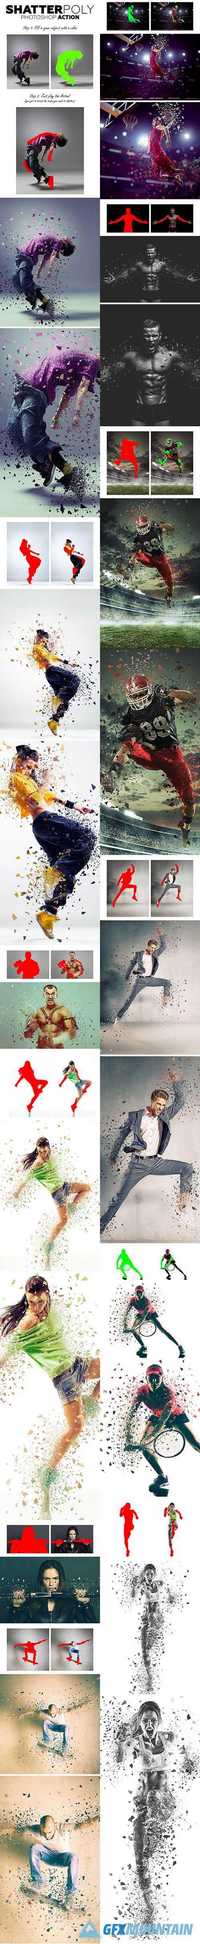 Graphicriver - Shatterpoly Photoshop Action 19359412